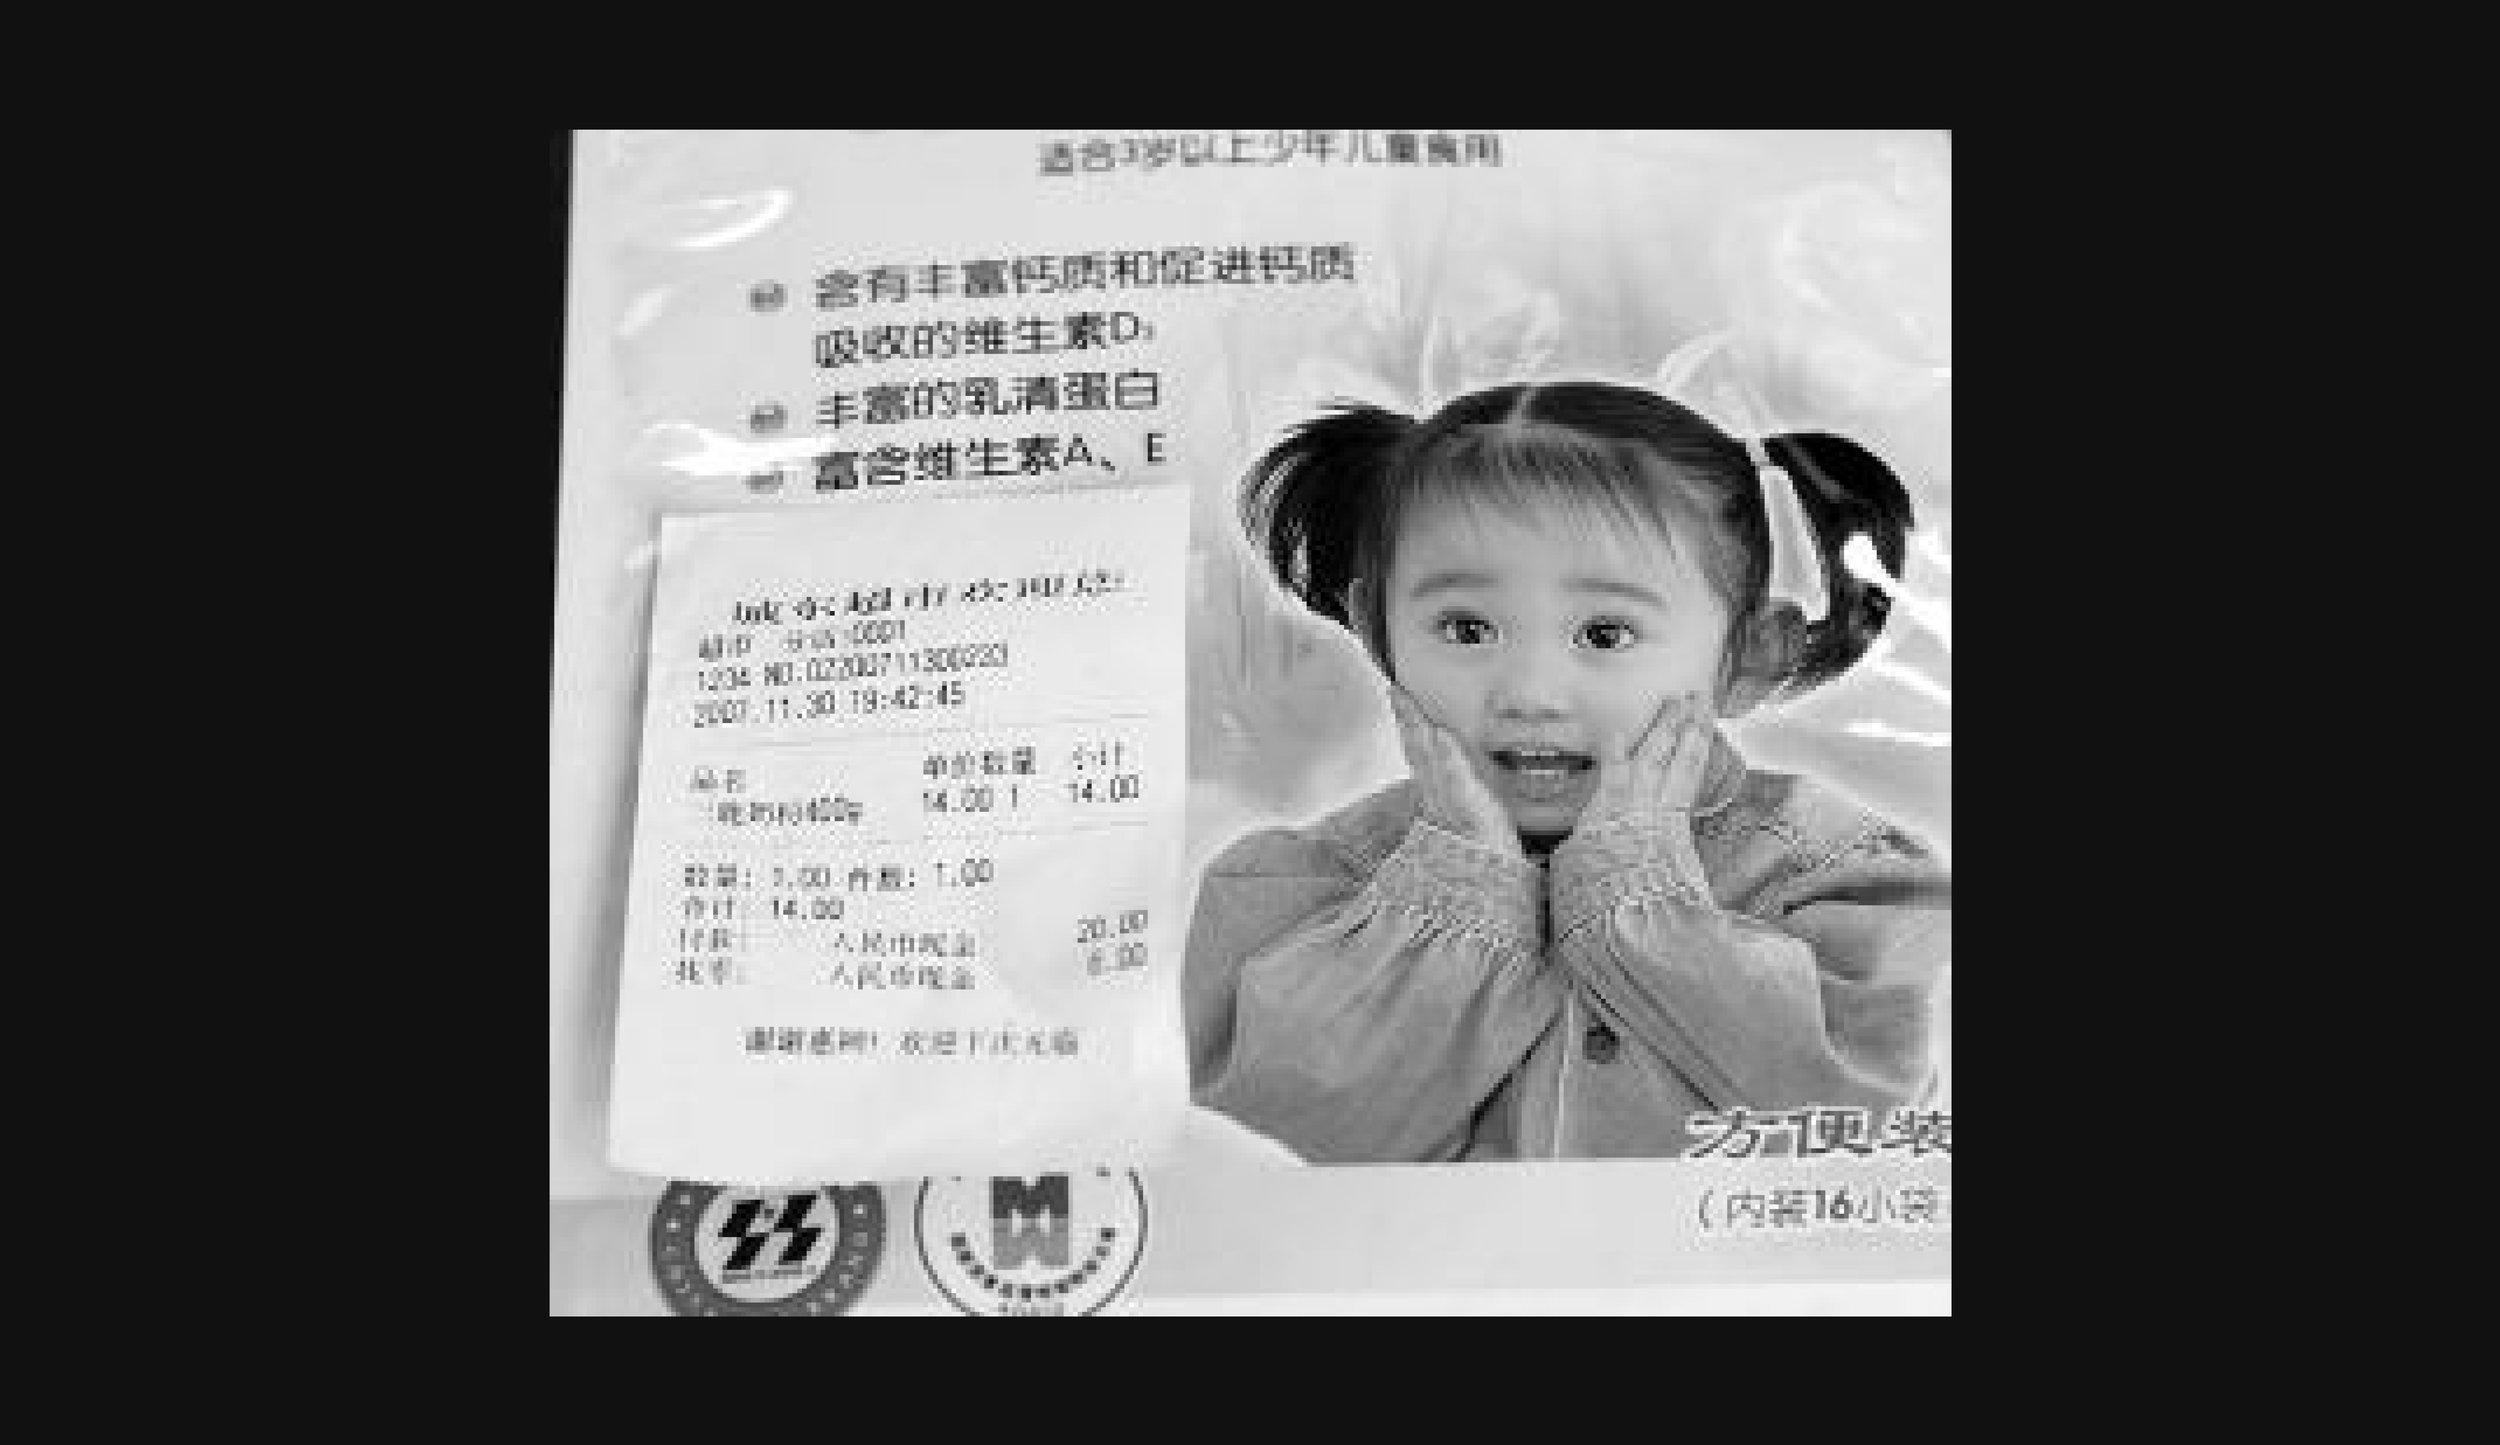  A packet of children’s milk powder Mr. Wang had purchased on November 30, 2007 